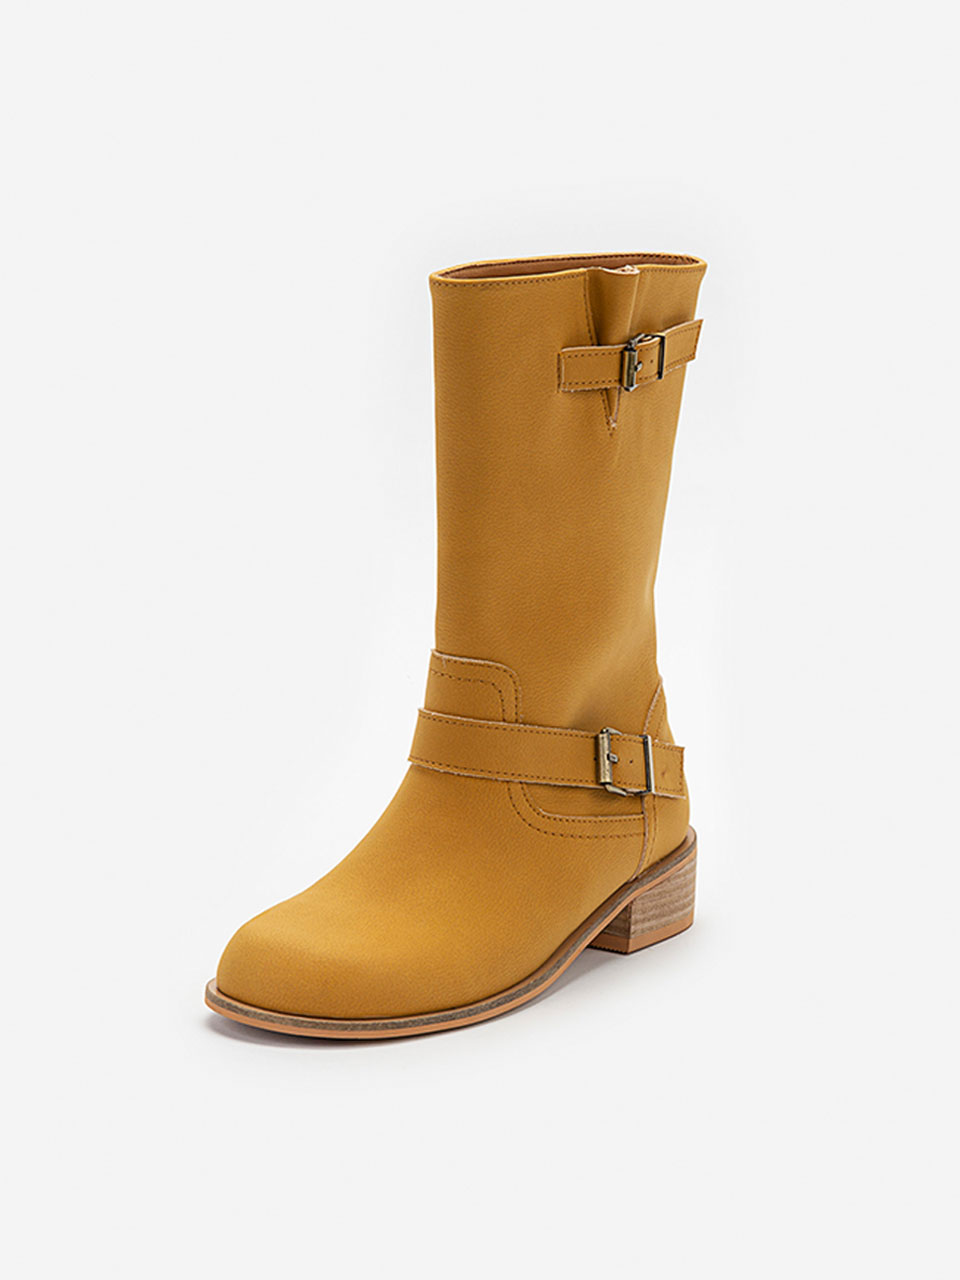 Buckle Middle Boots (Mustard)